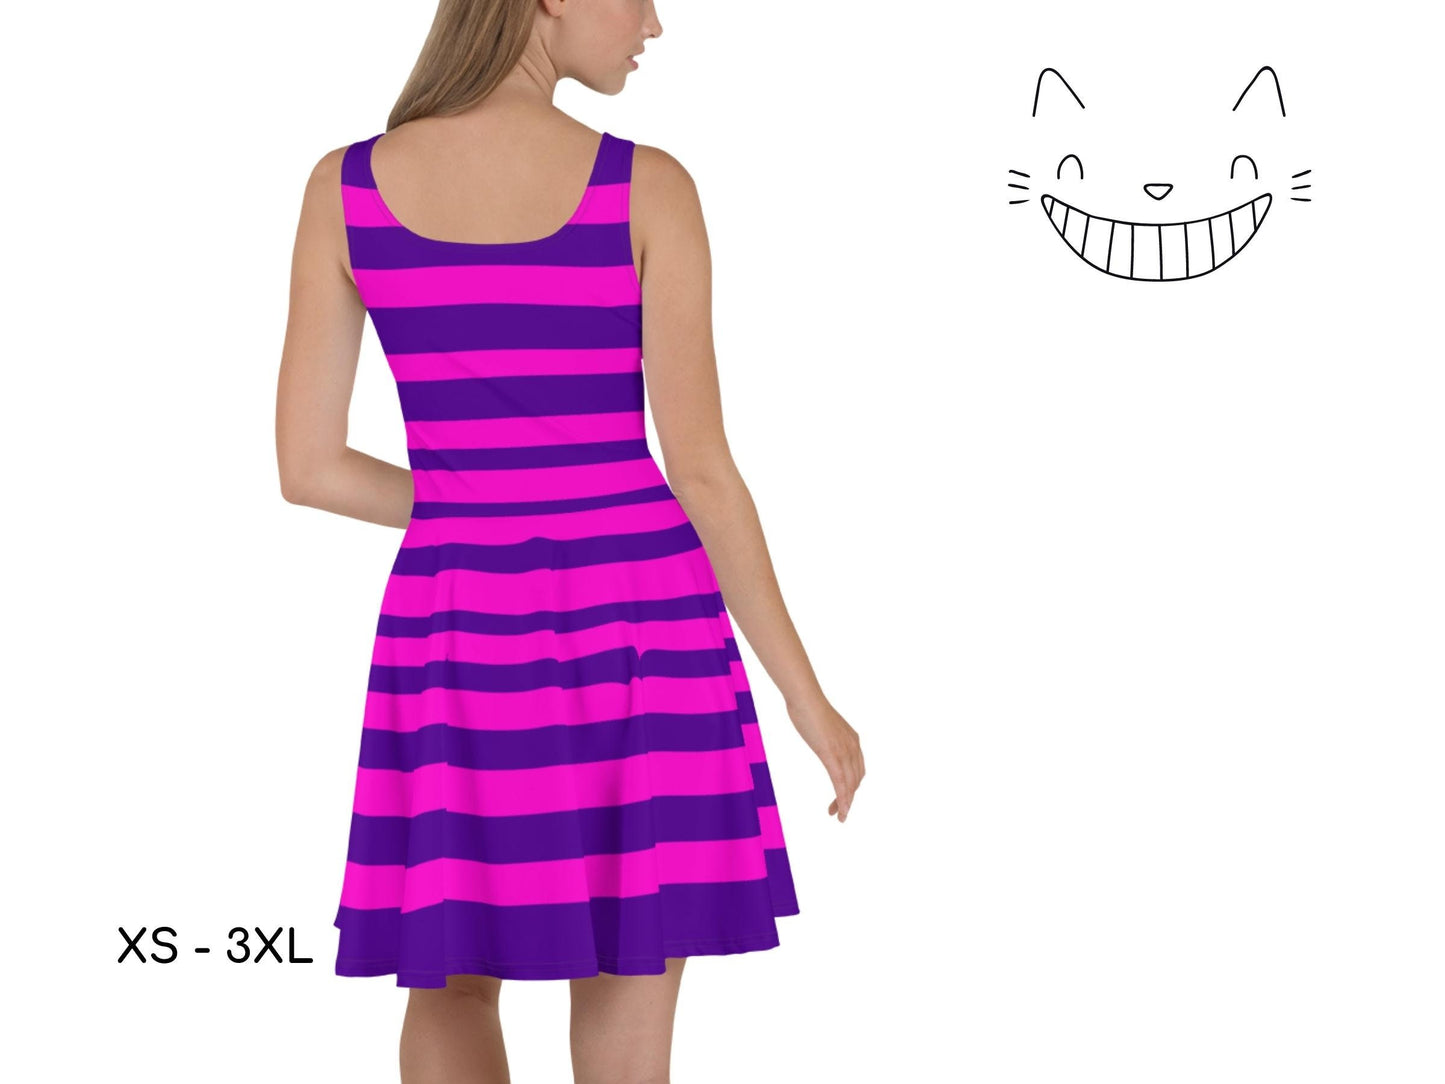 Cheshire Cat Inspired Skater Dress, Dapper Day, Alice In Wonderland, Tea Party, Adult Halloween Costume, Cosplay Dress, Gift for Her